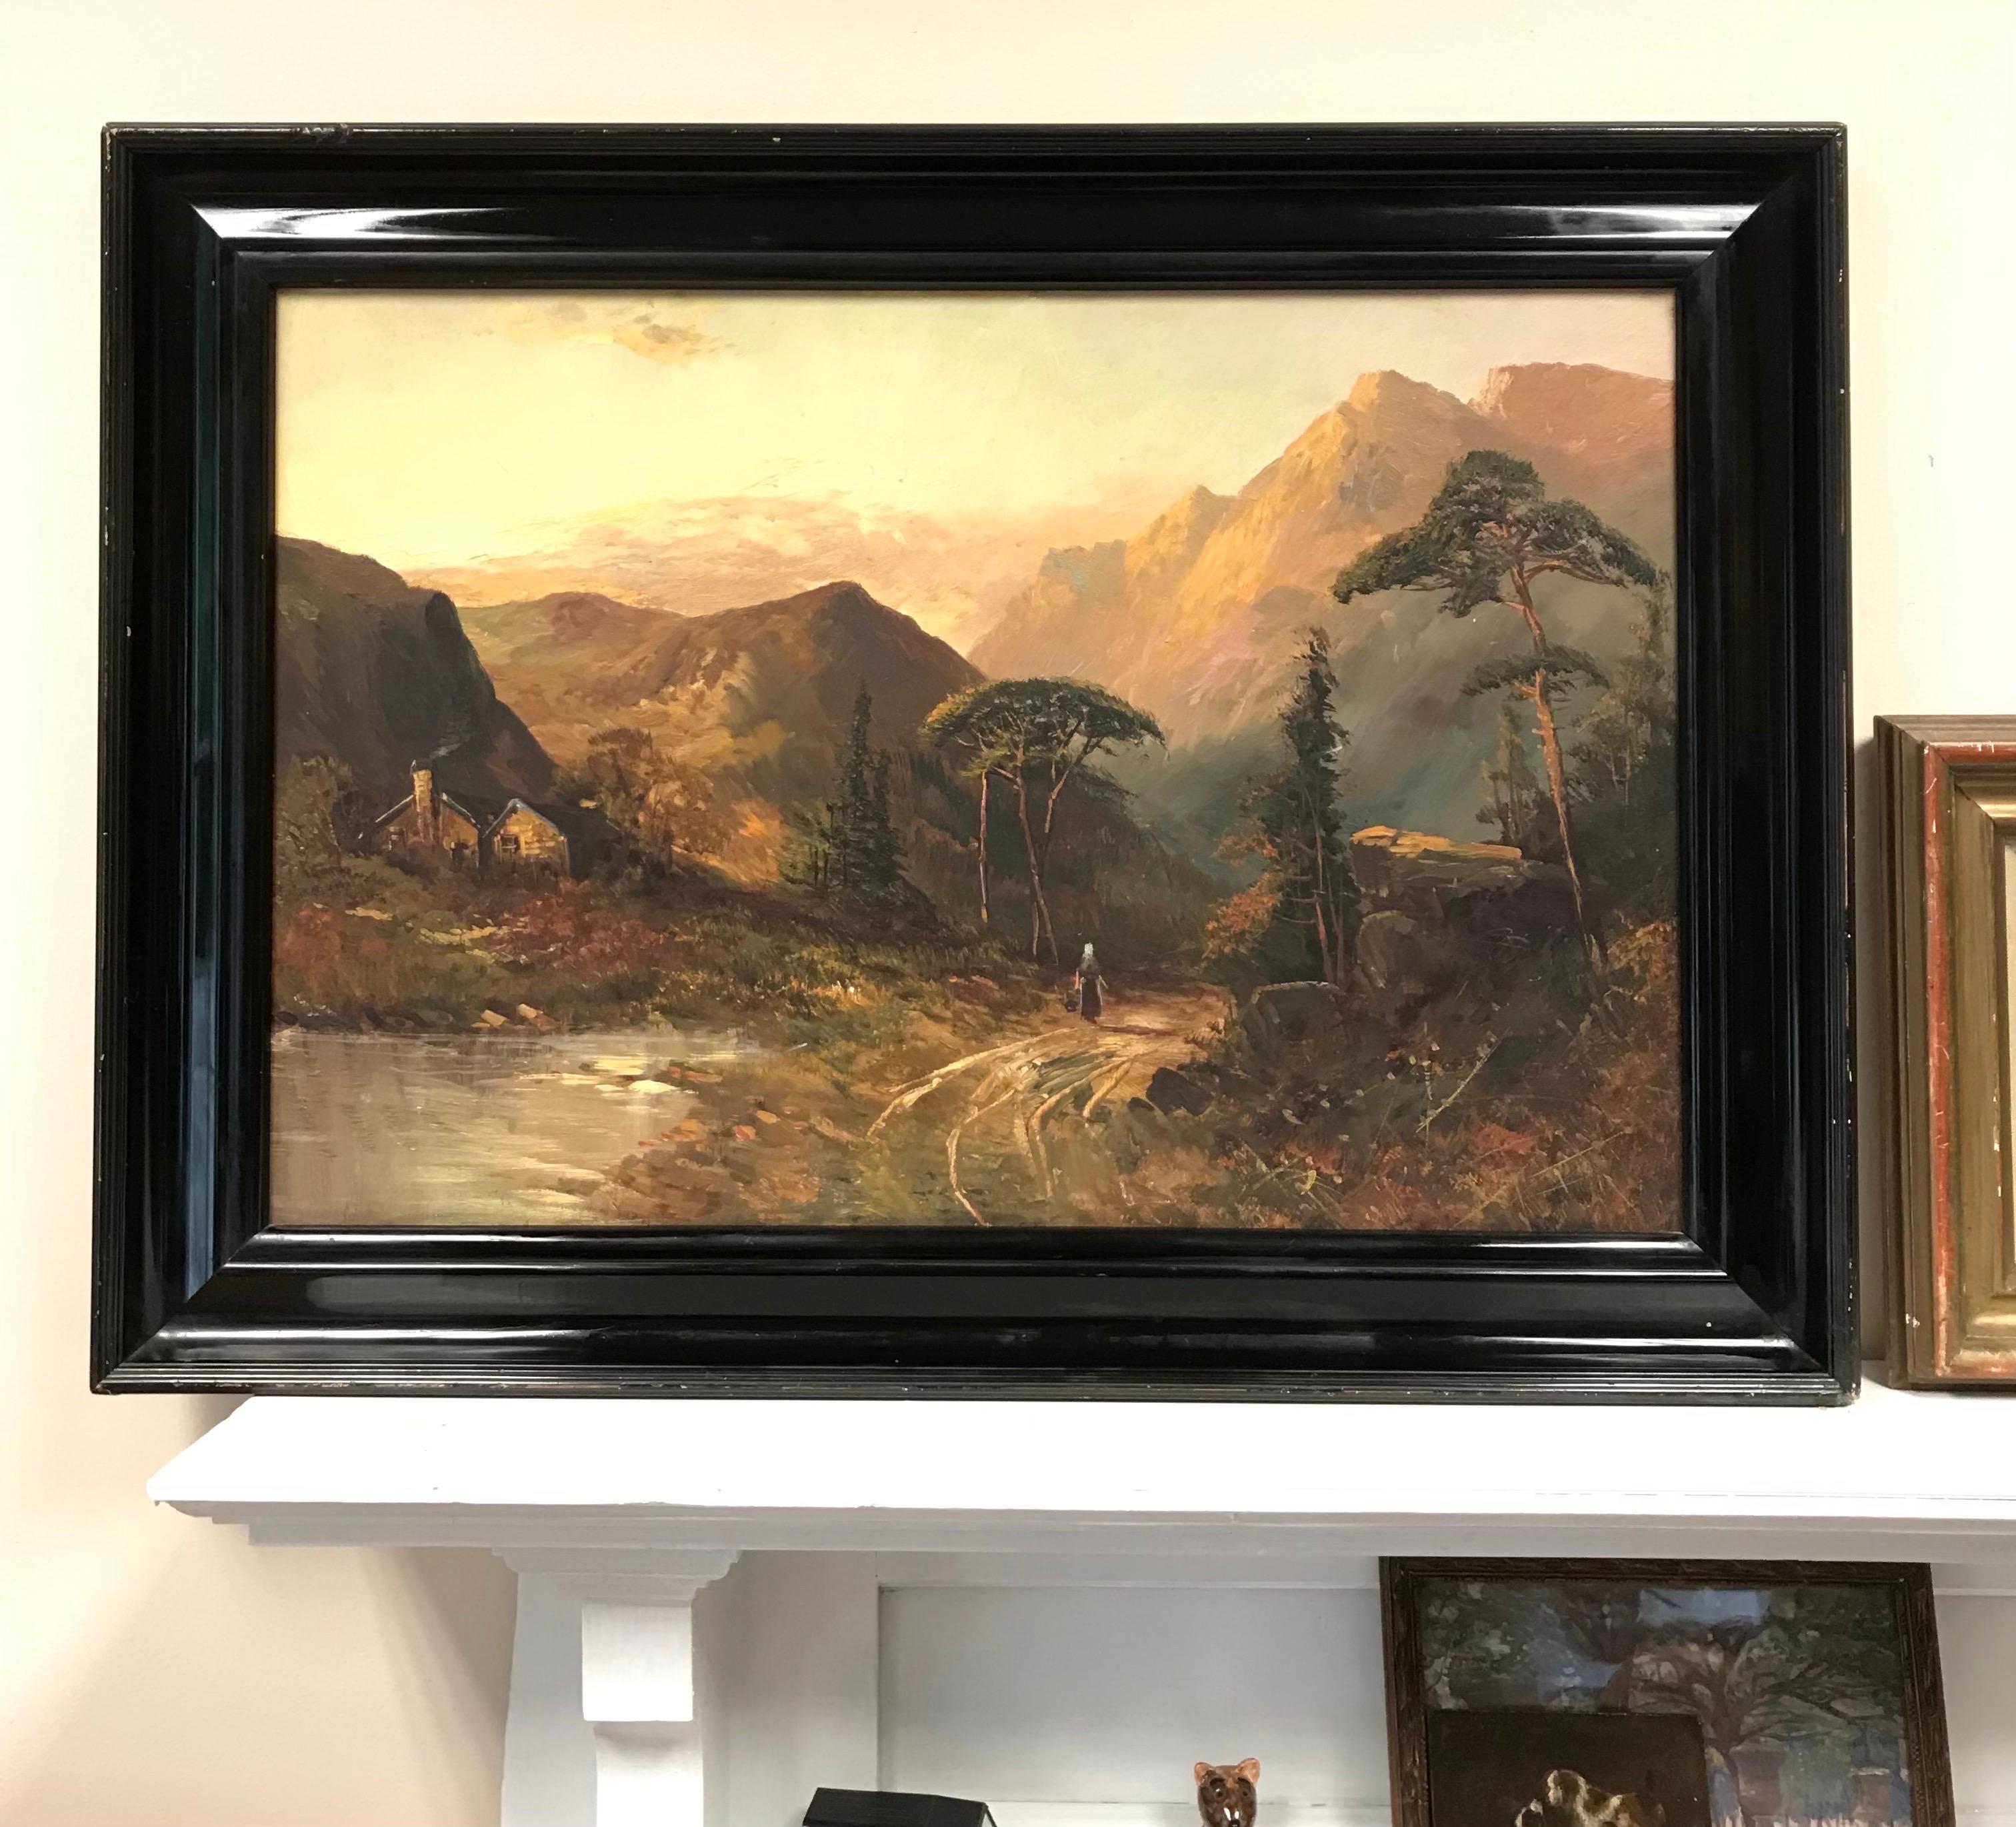 Antique Scottish Highlands Oil Painting Sunset Mountain Figure in River Glen - Brown Landscape Painting by Francis E. Jamieson